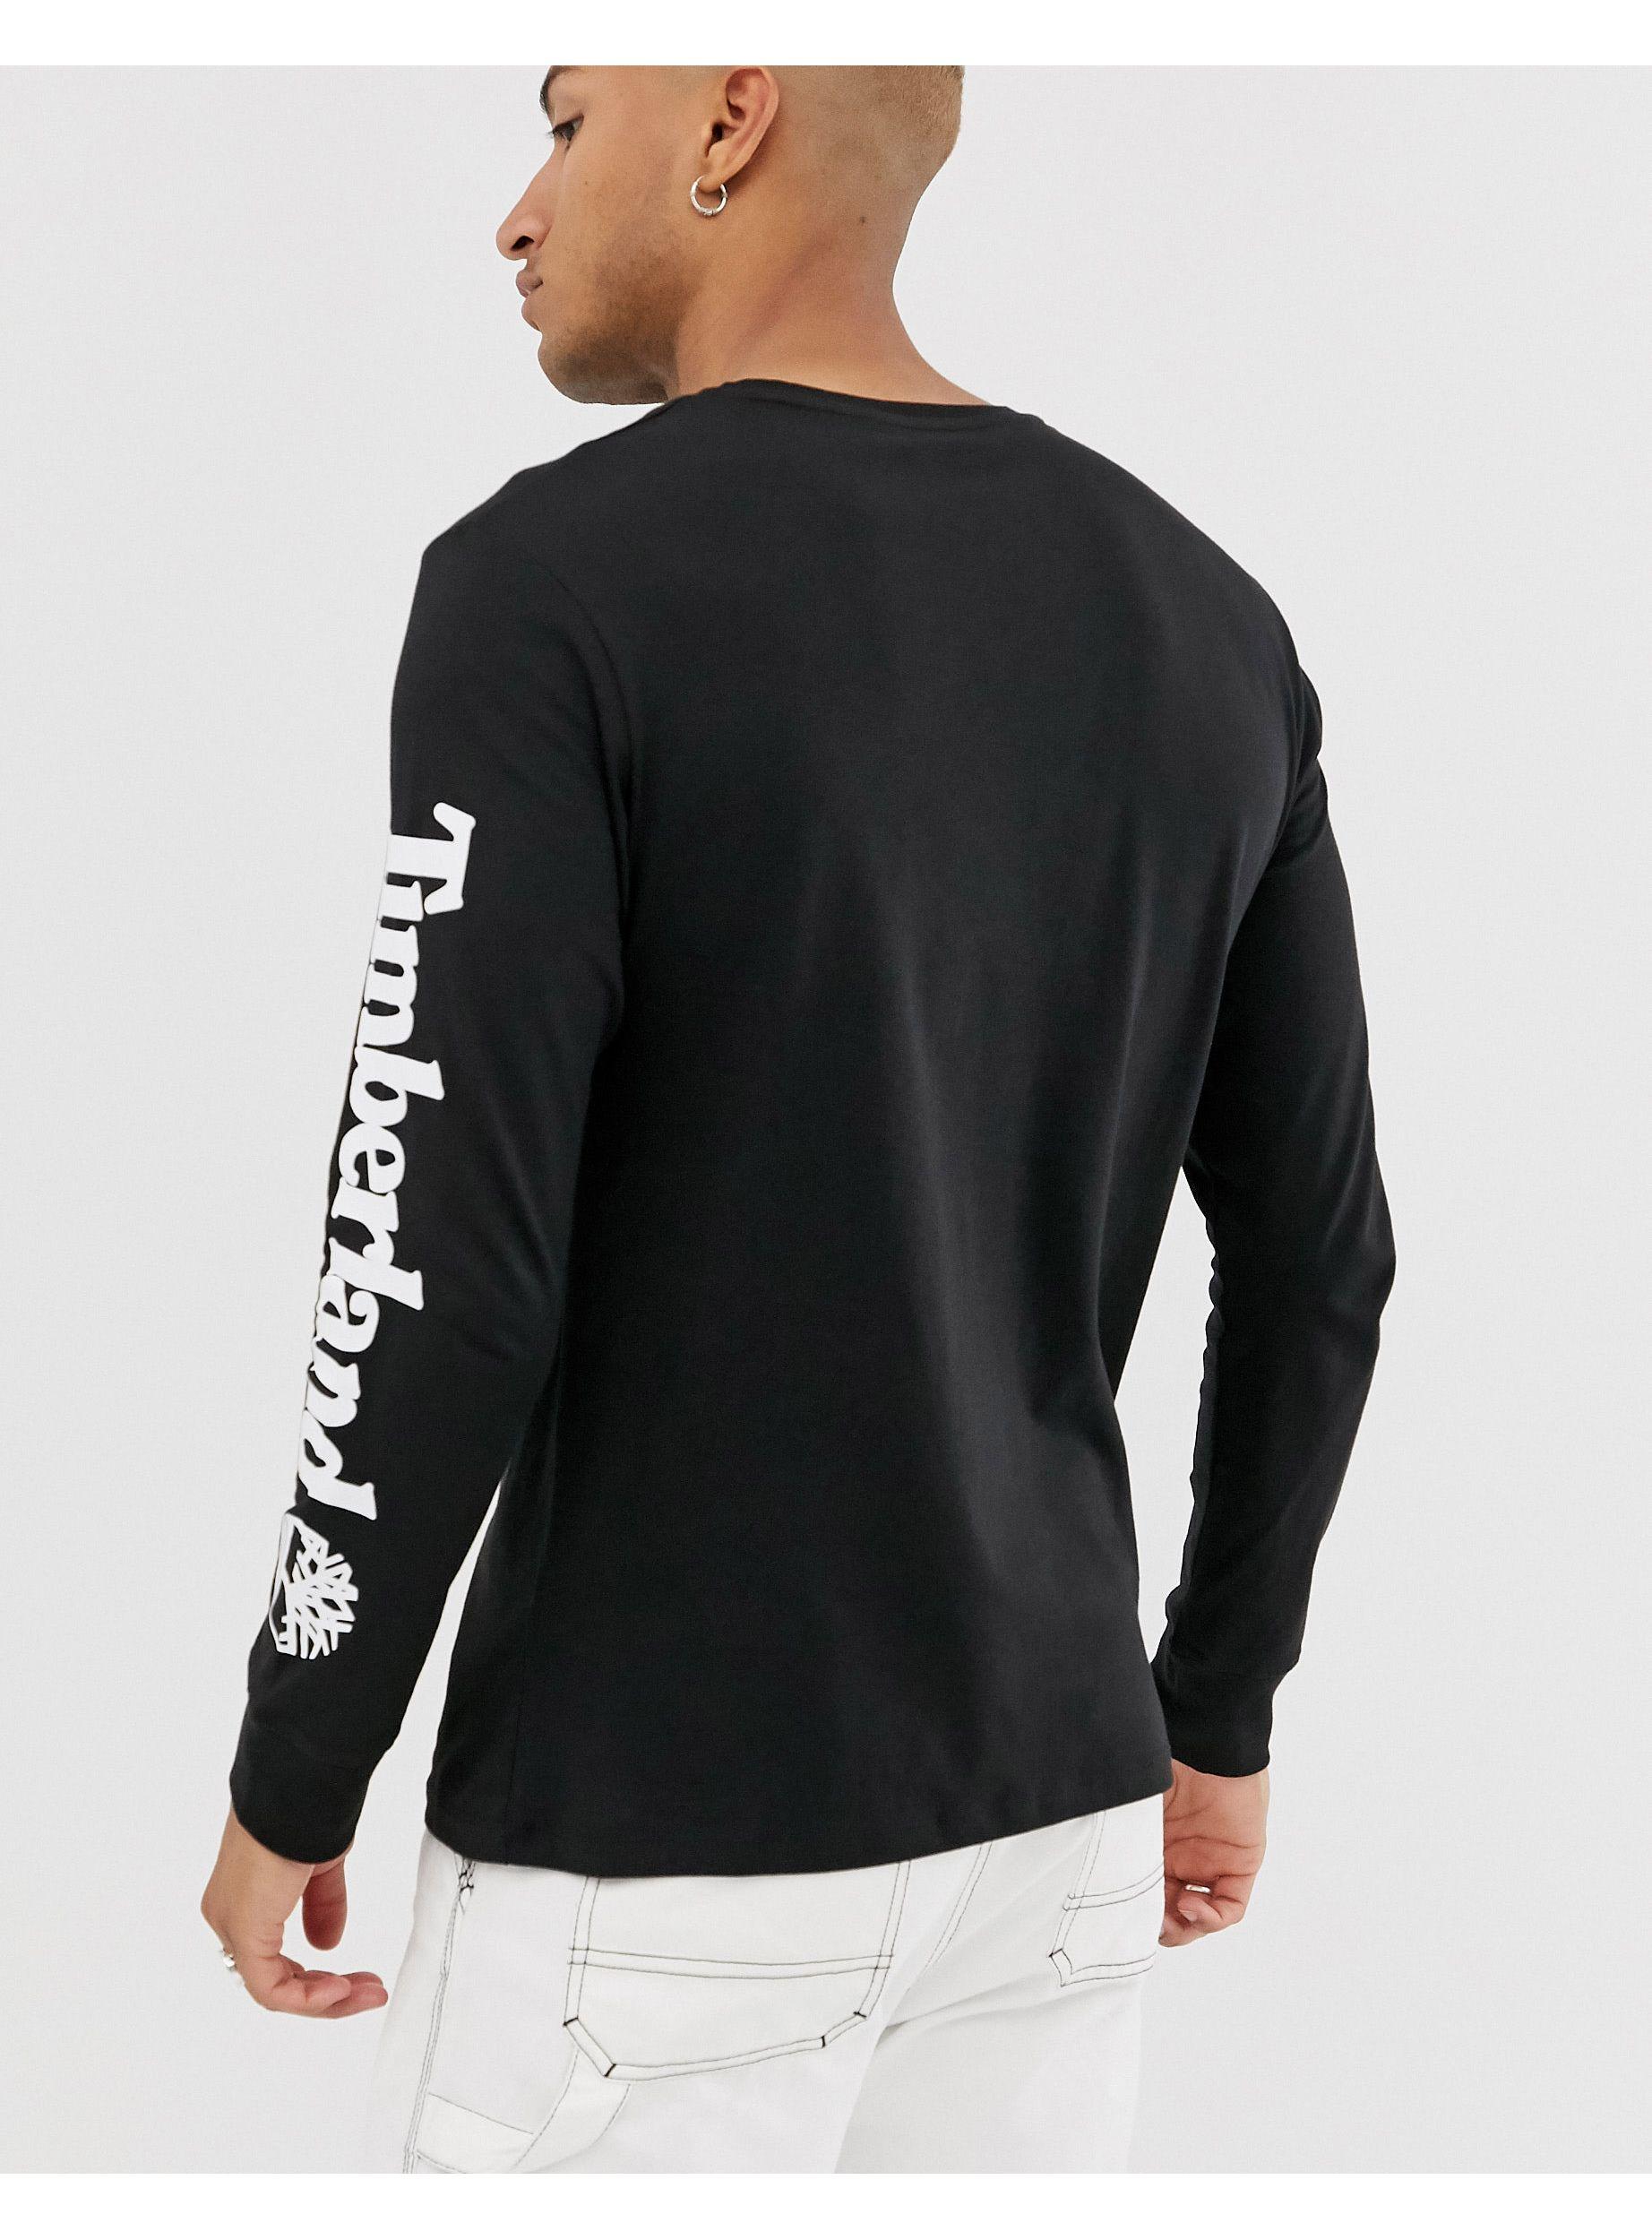 Timberland Exclusive Long Sleeve Arm Logo T-shirt in Black for Men